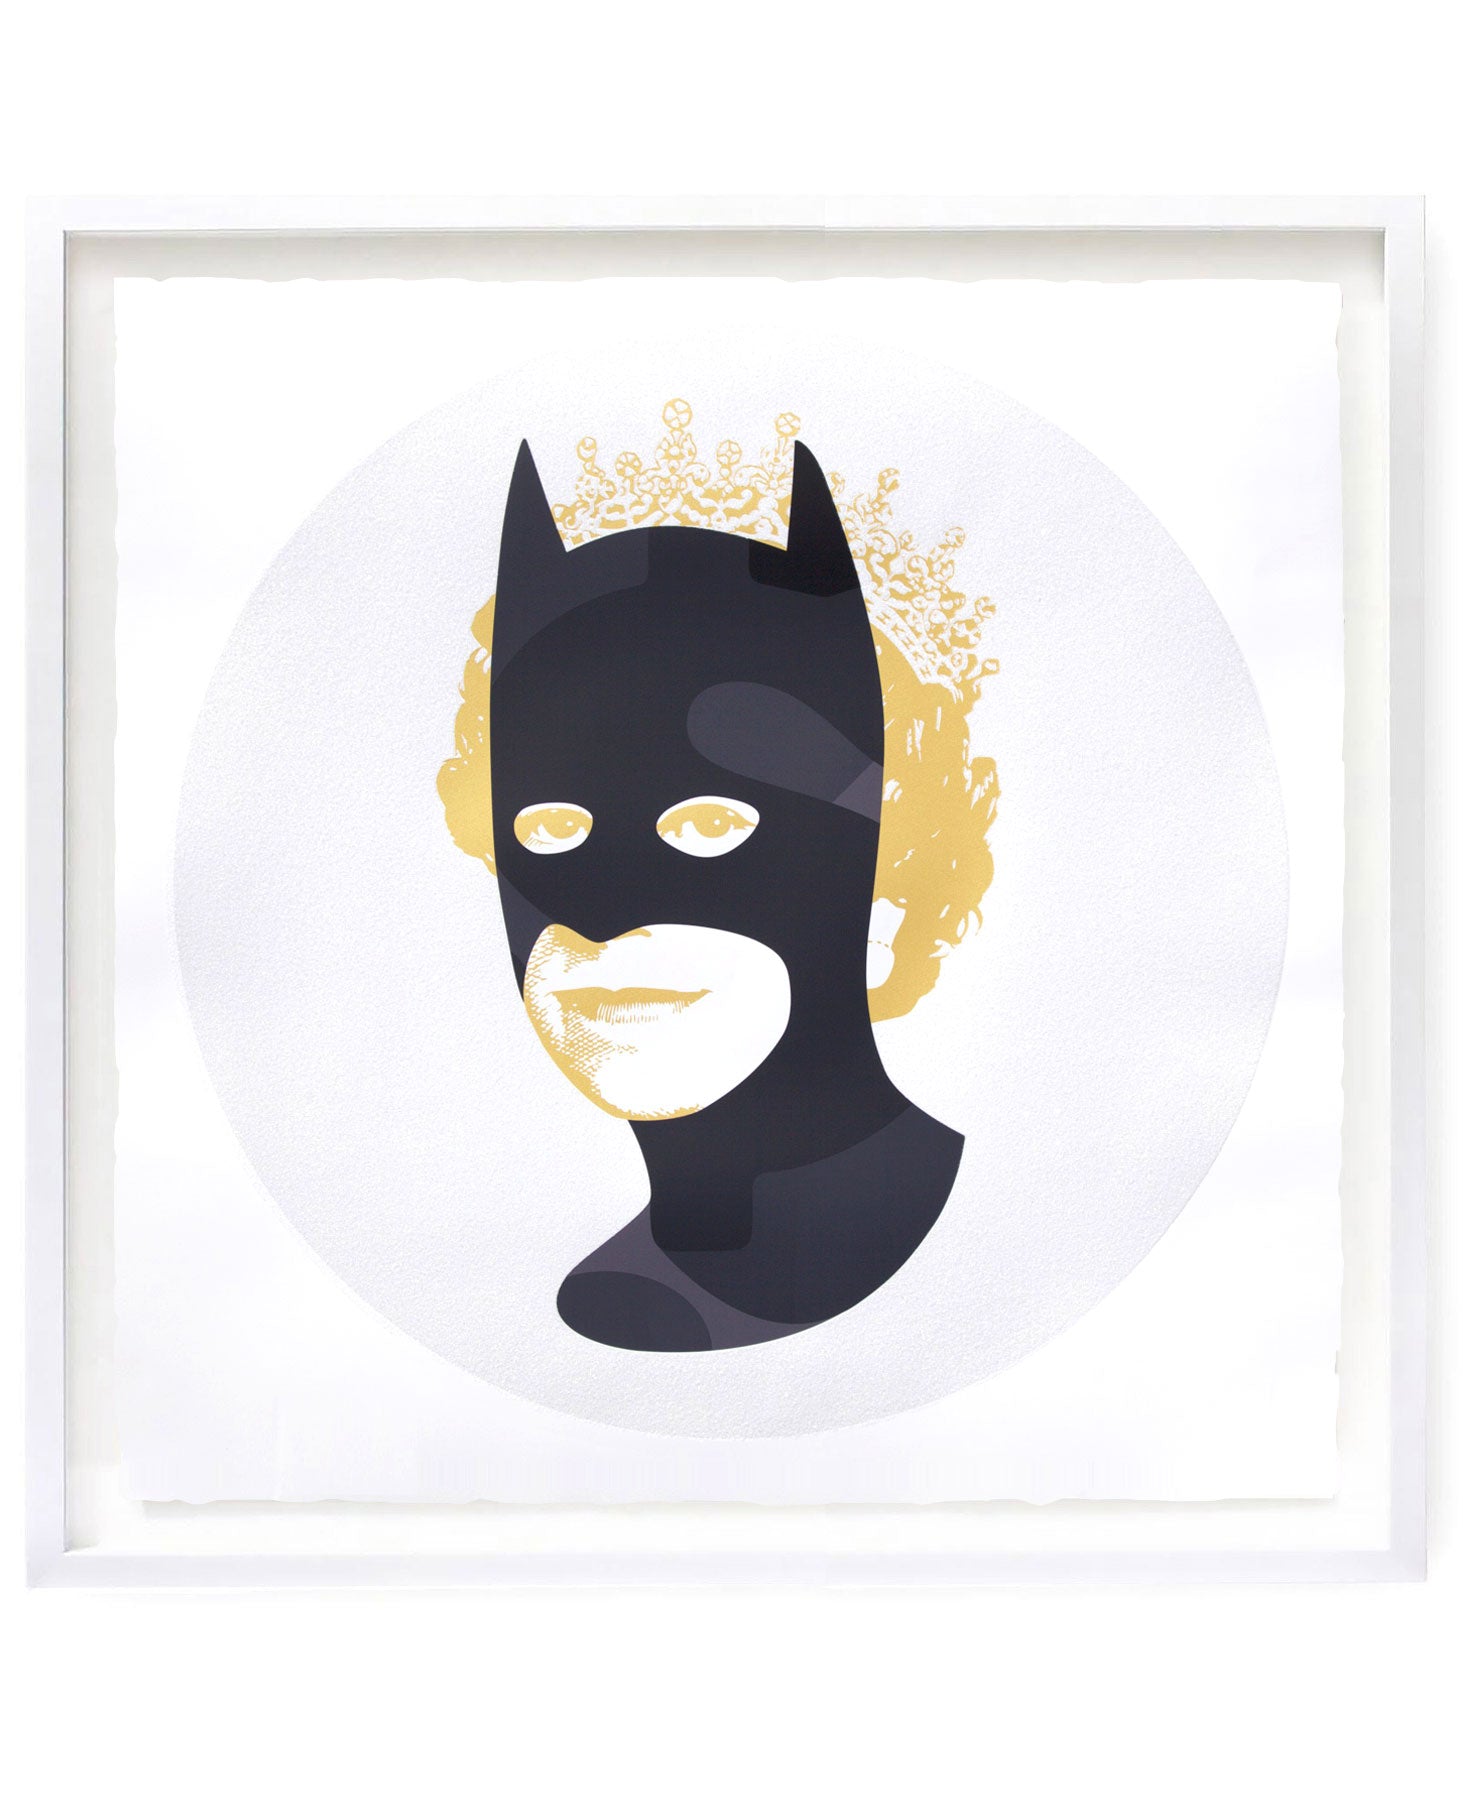 Rich Enough to be Batman by contemporary artist features camo print, gold and diamond dust glitter